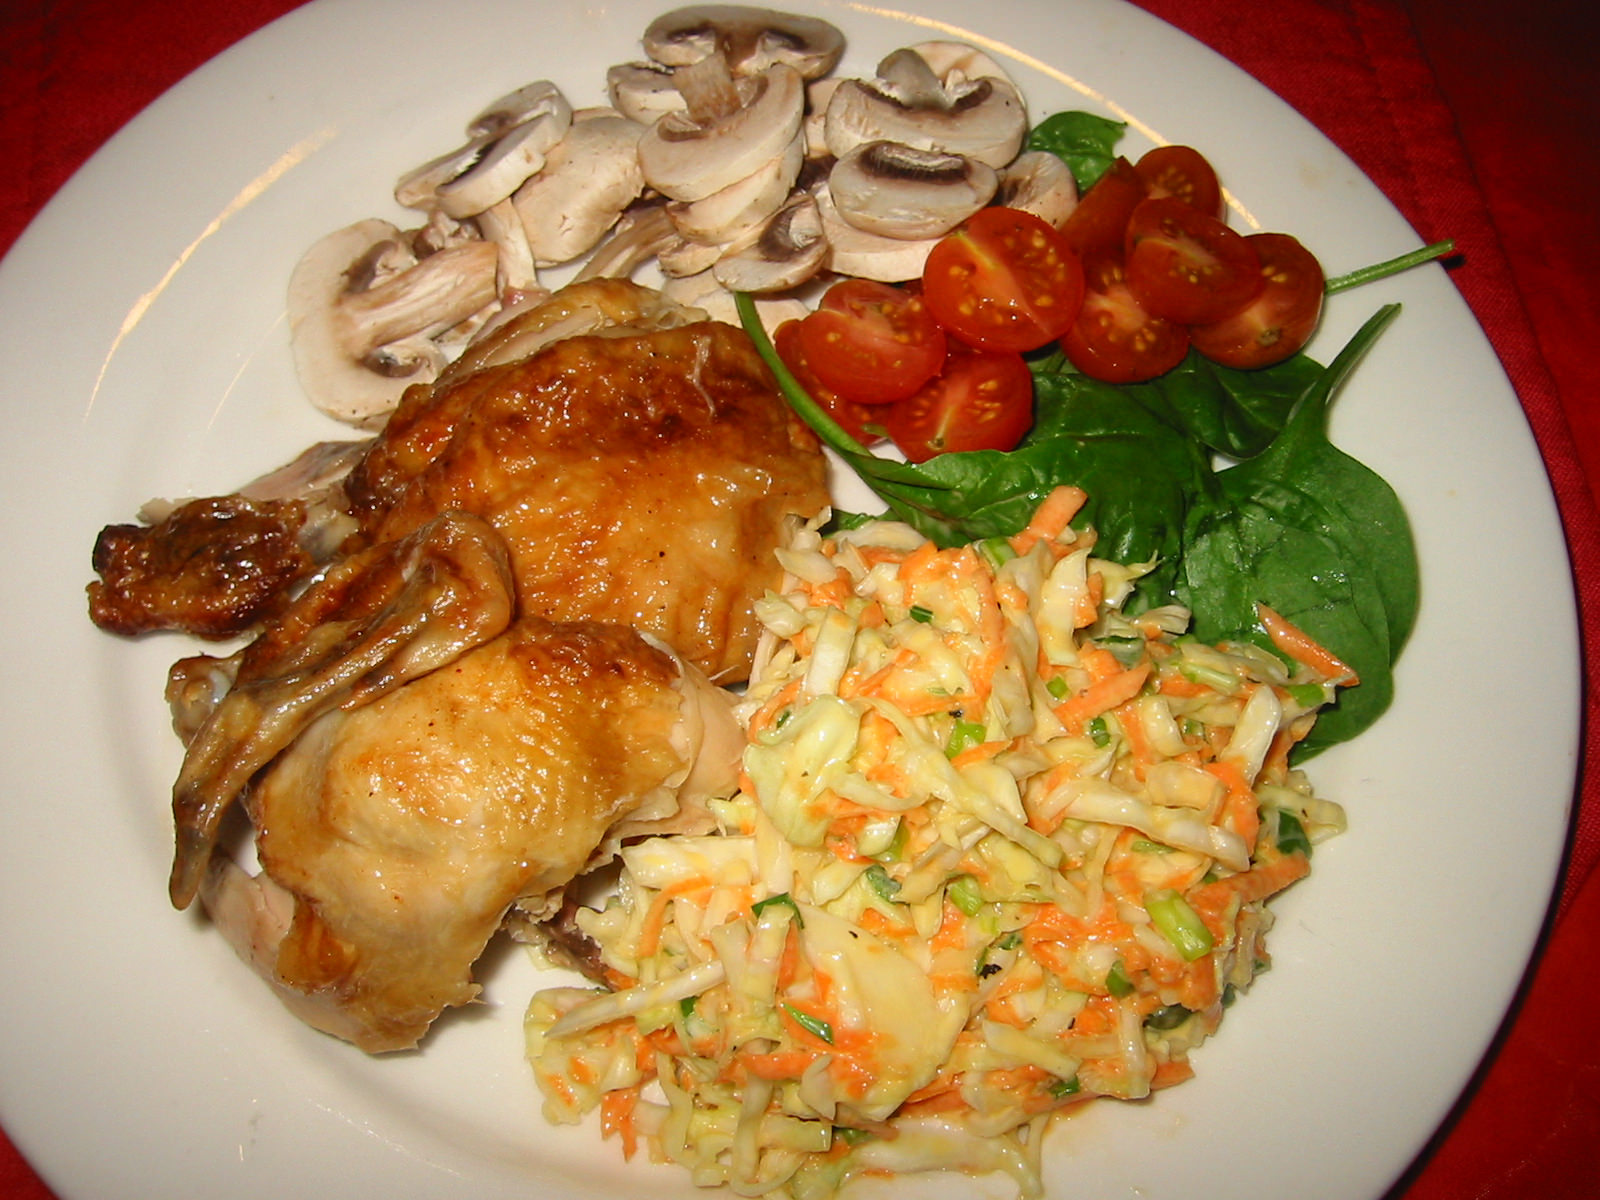 BBQ Chook with coleslaw and other salads